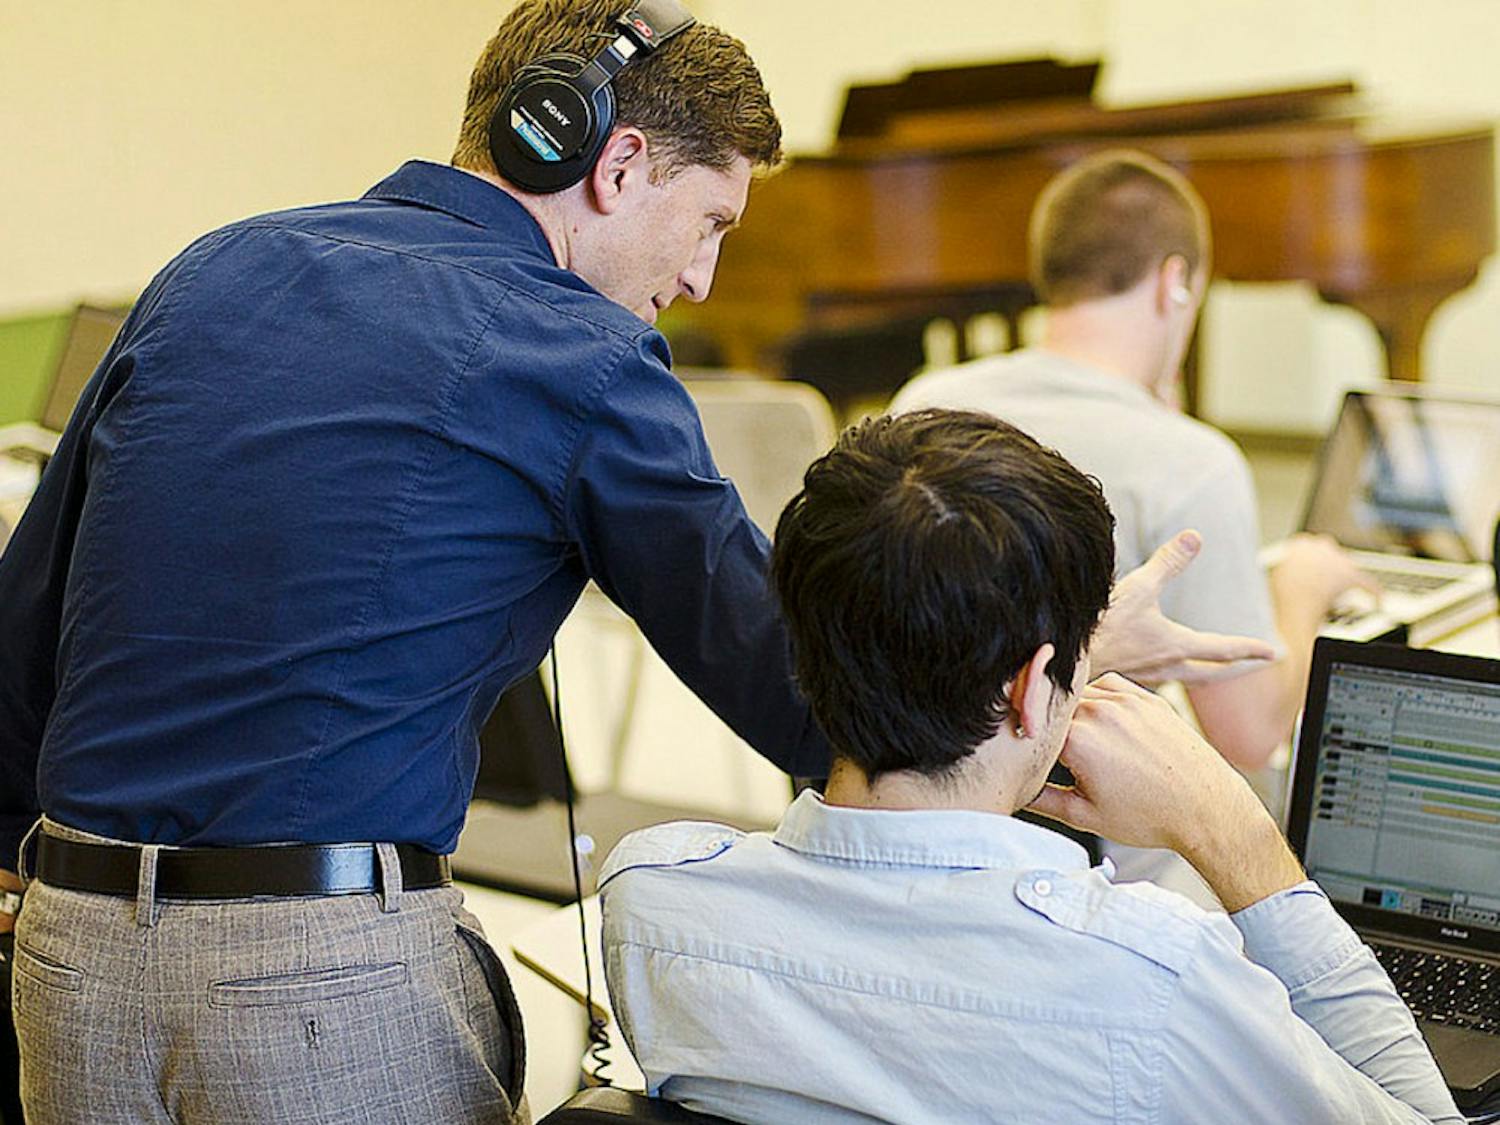 Photo: The beat and beyond: UNC students learn how to create and produce their own beats in a new class (Joseph Chapman)